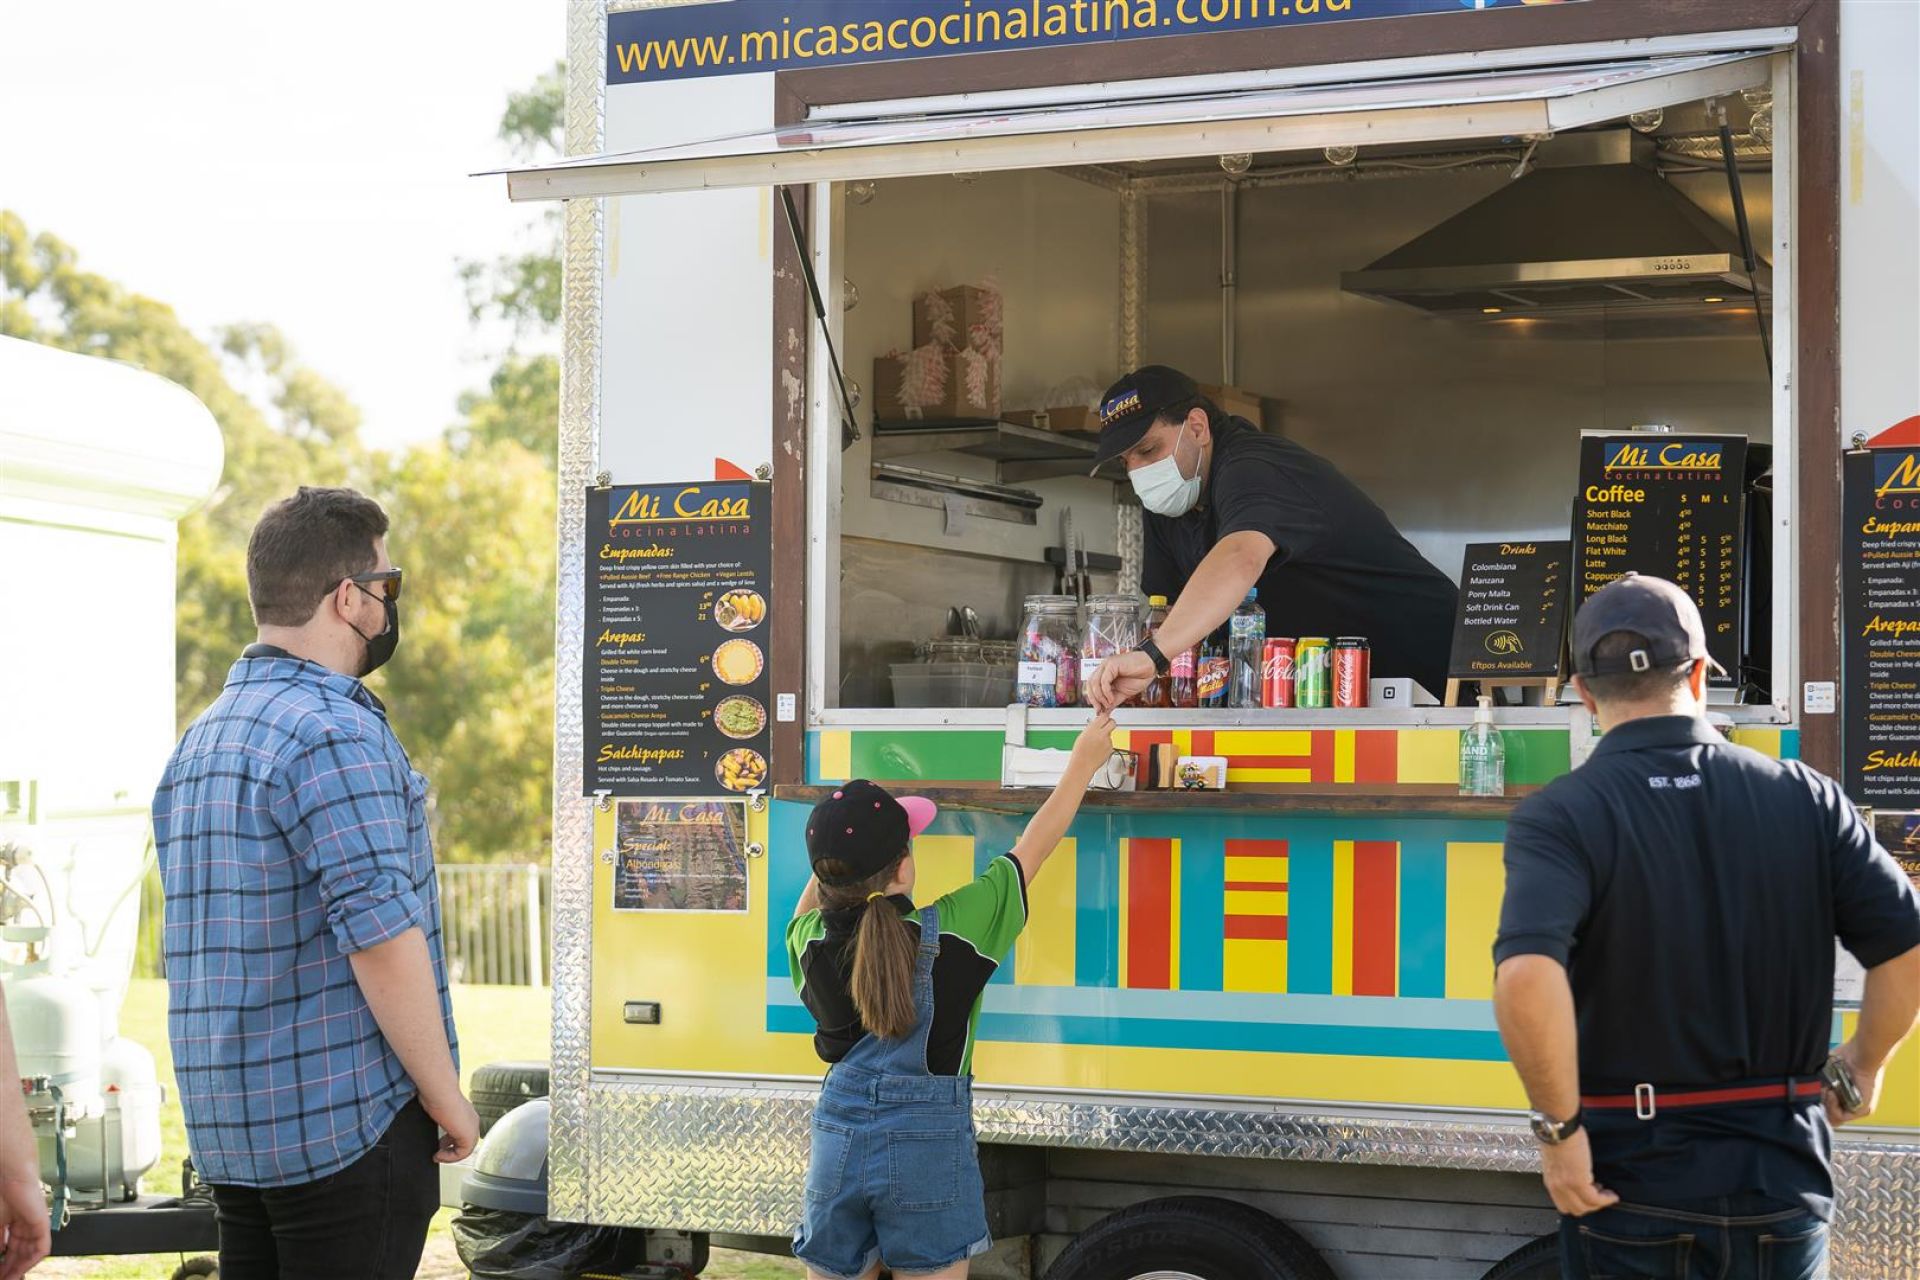 An employee from Mi Casa Latino Cucino serving il Cibo from a food truck